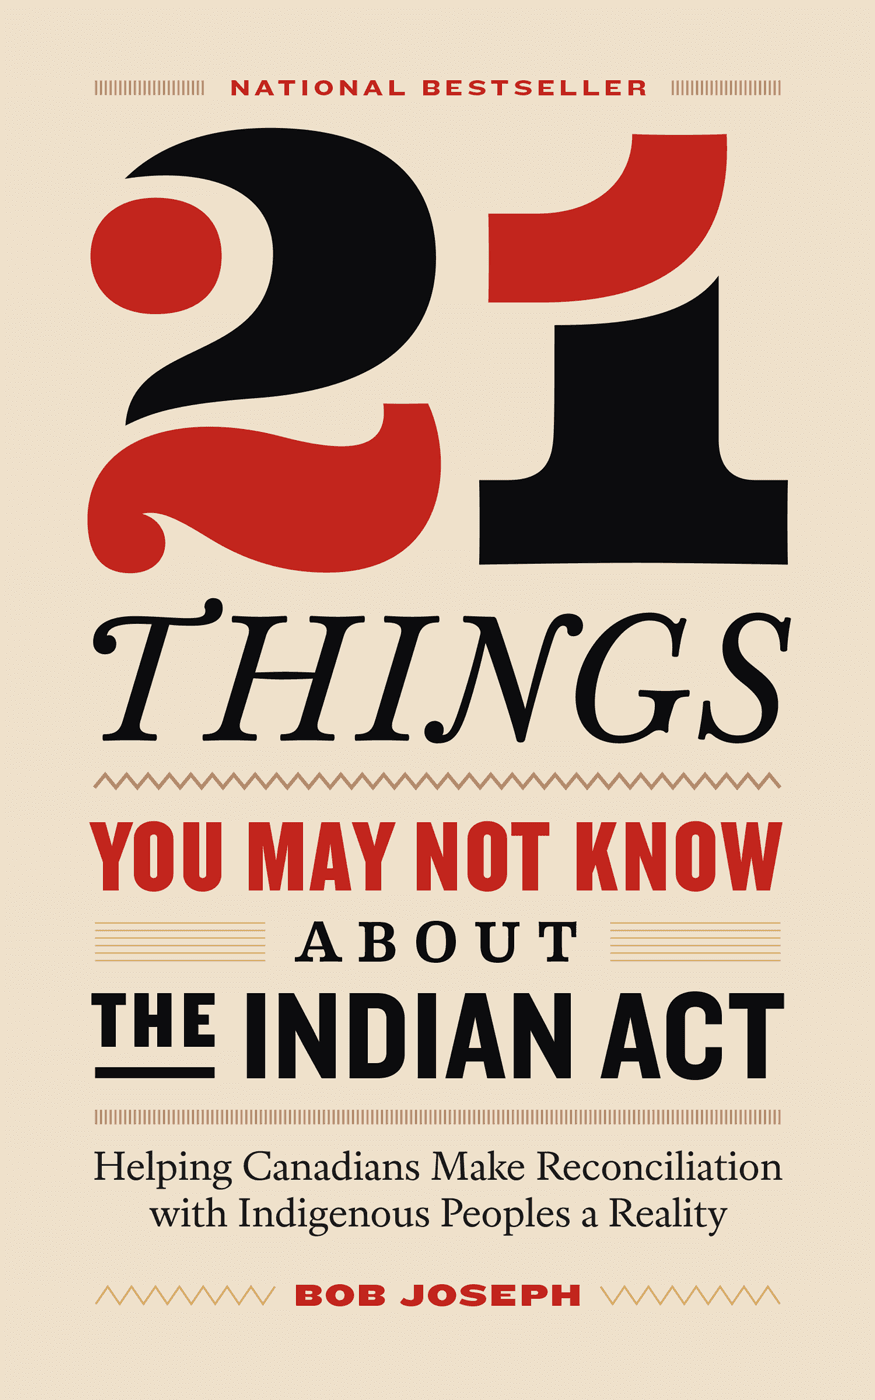 raincoast 21 things you may not know about the indian act : helping  Canadians make reconciliation with indigenous  peoples a reality  by Bob Joseph